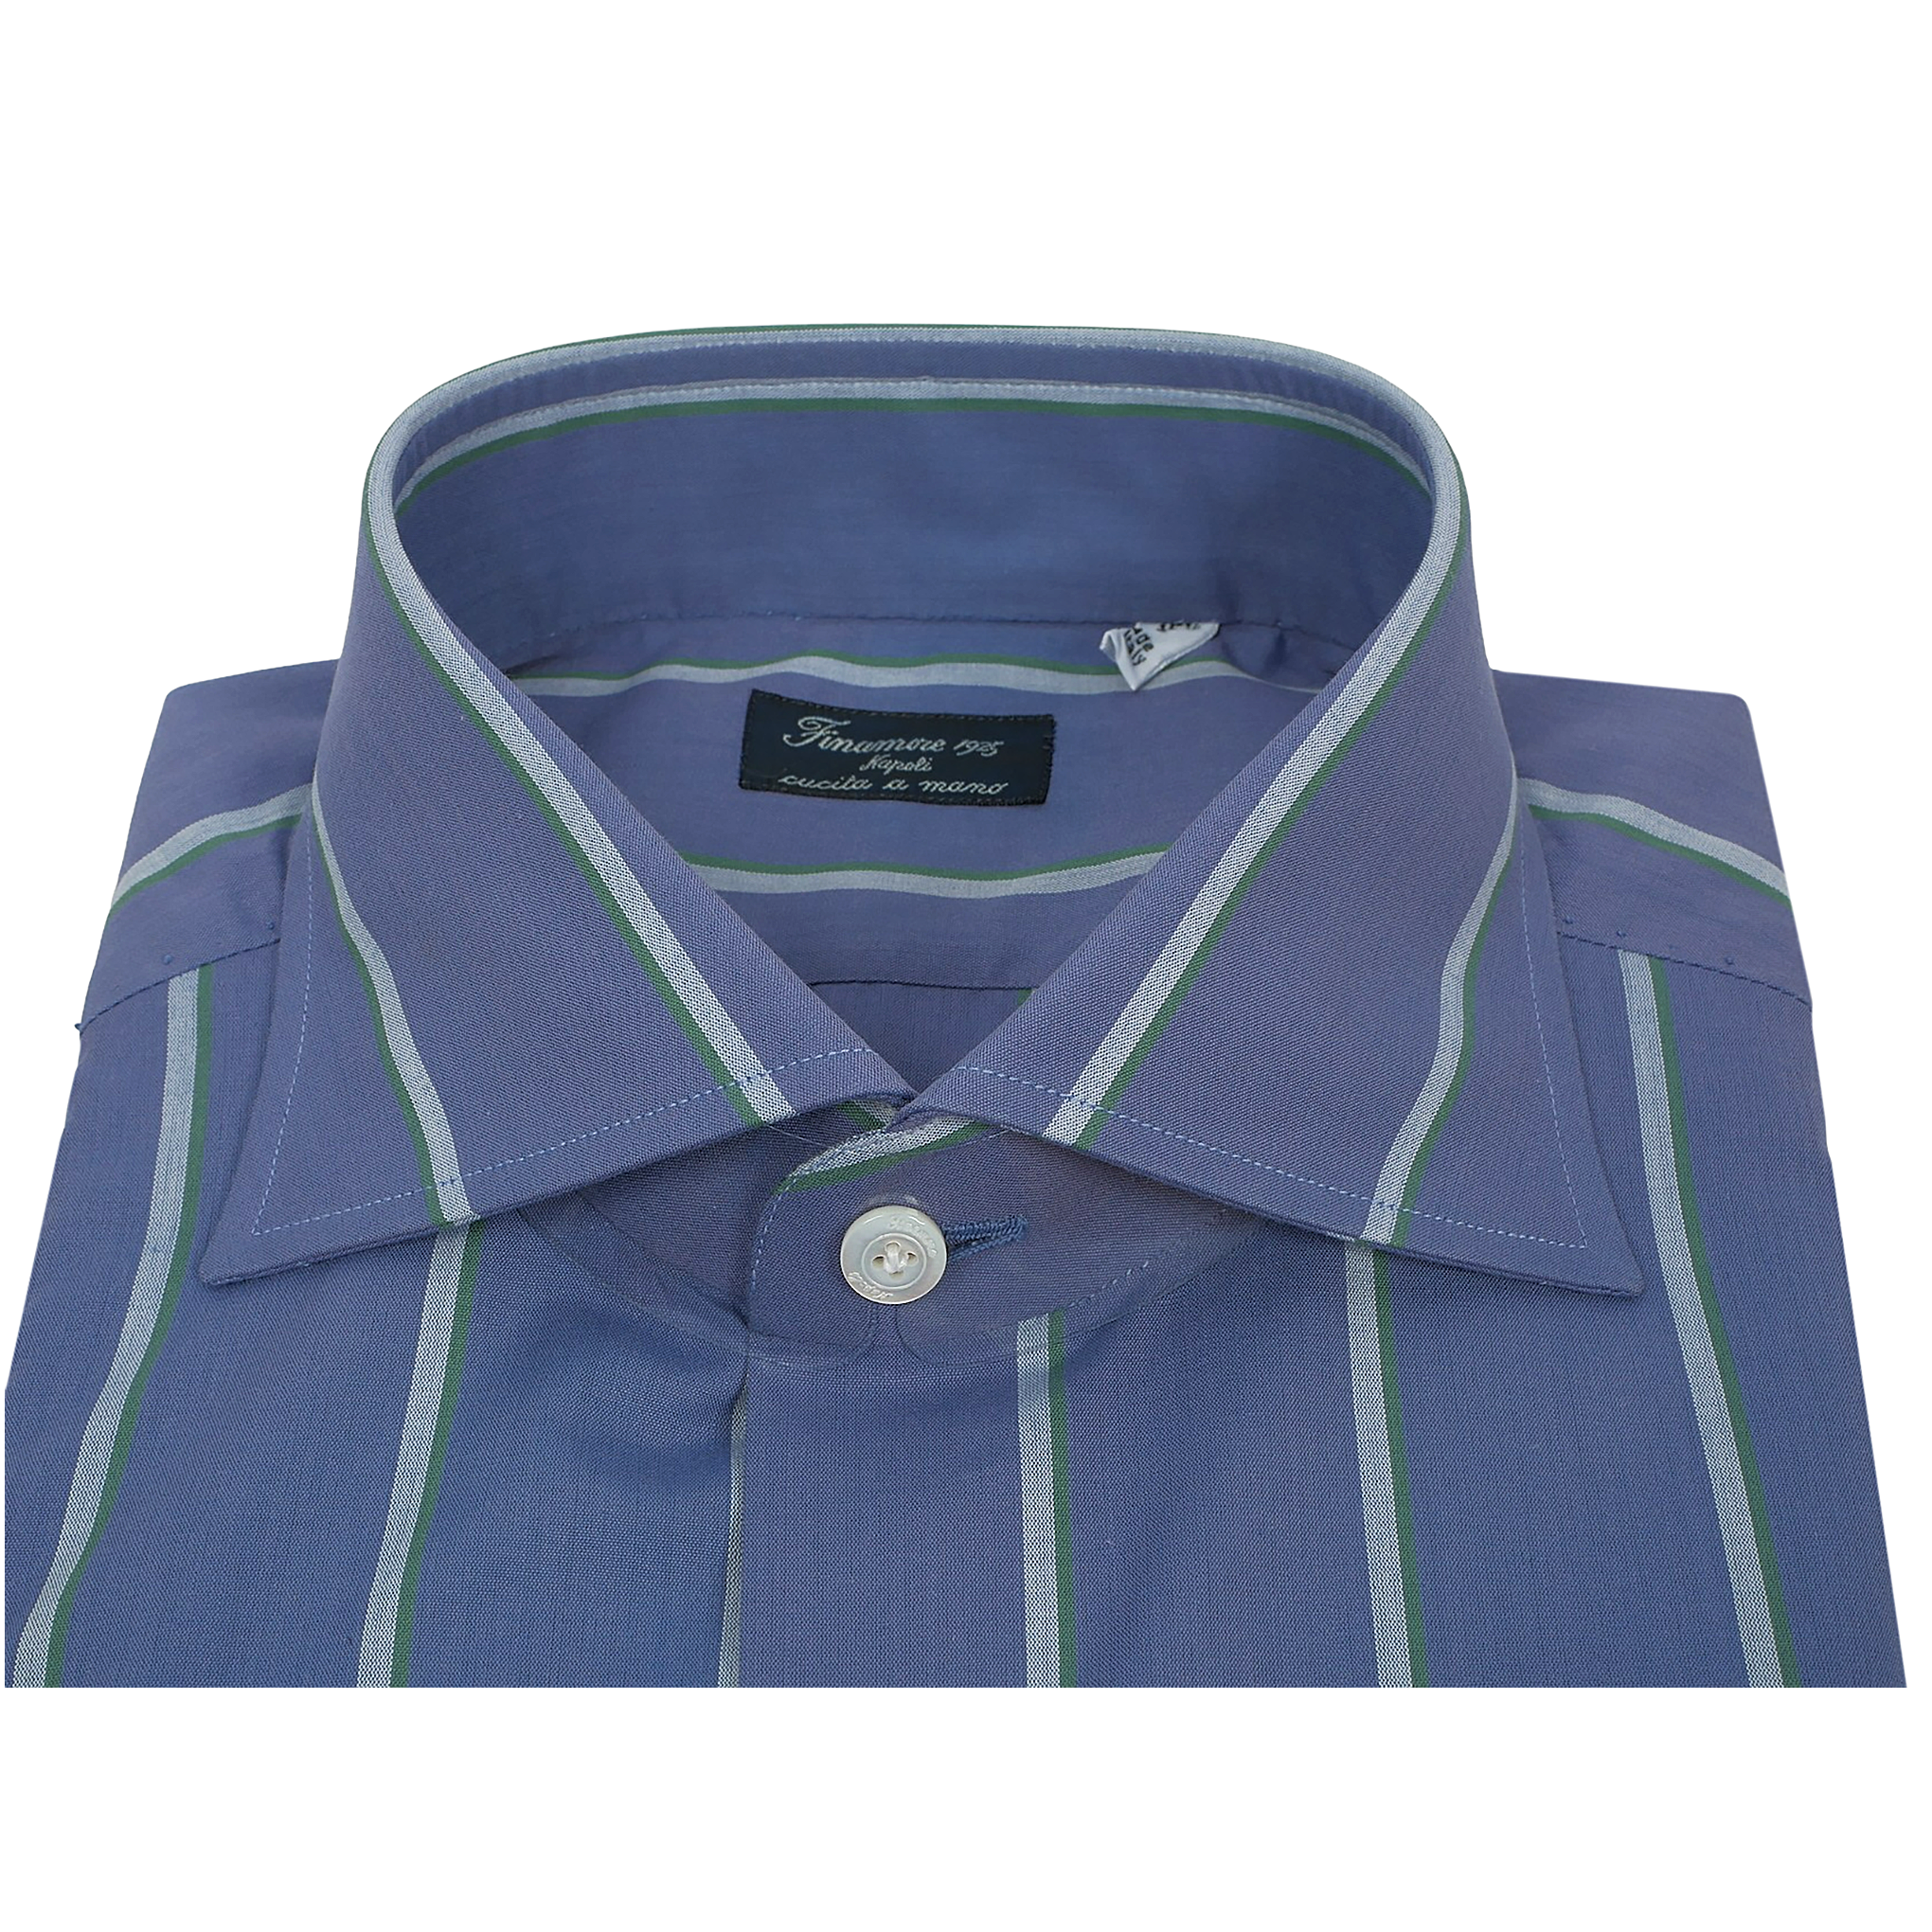 Npoli regular shirt in cotton Riva striped blue and green